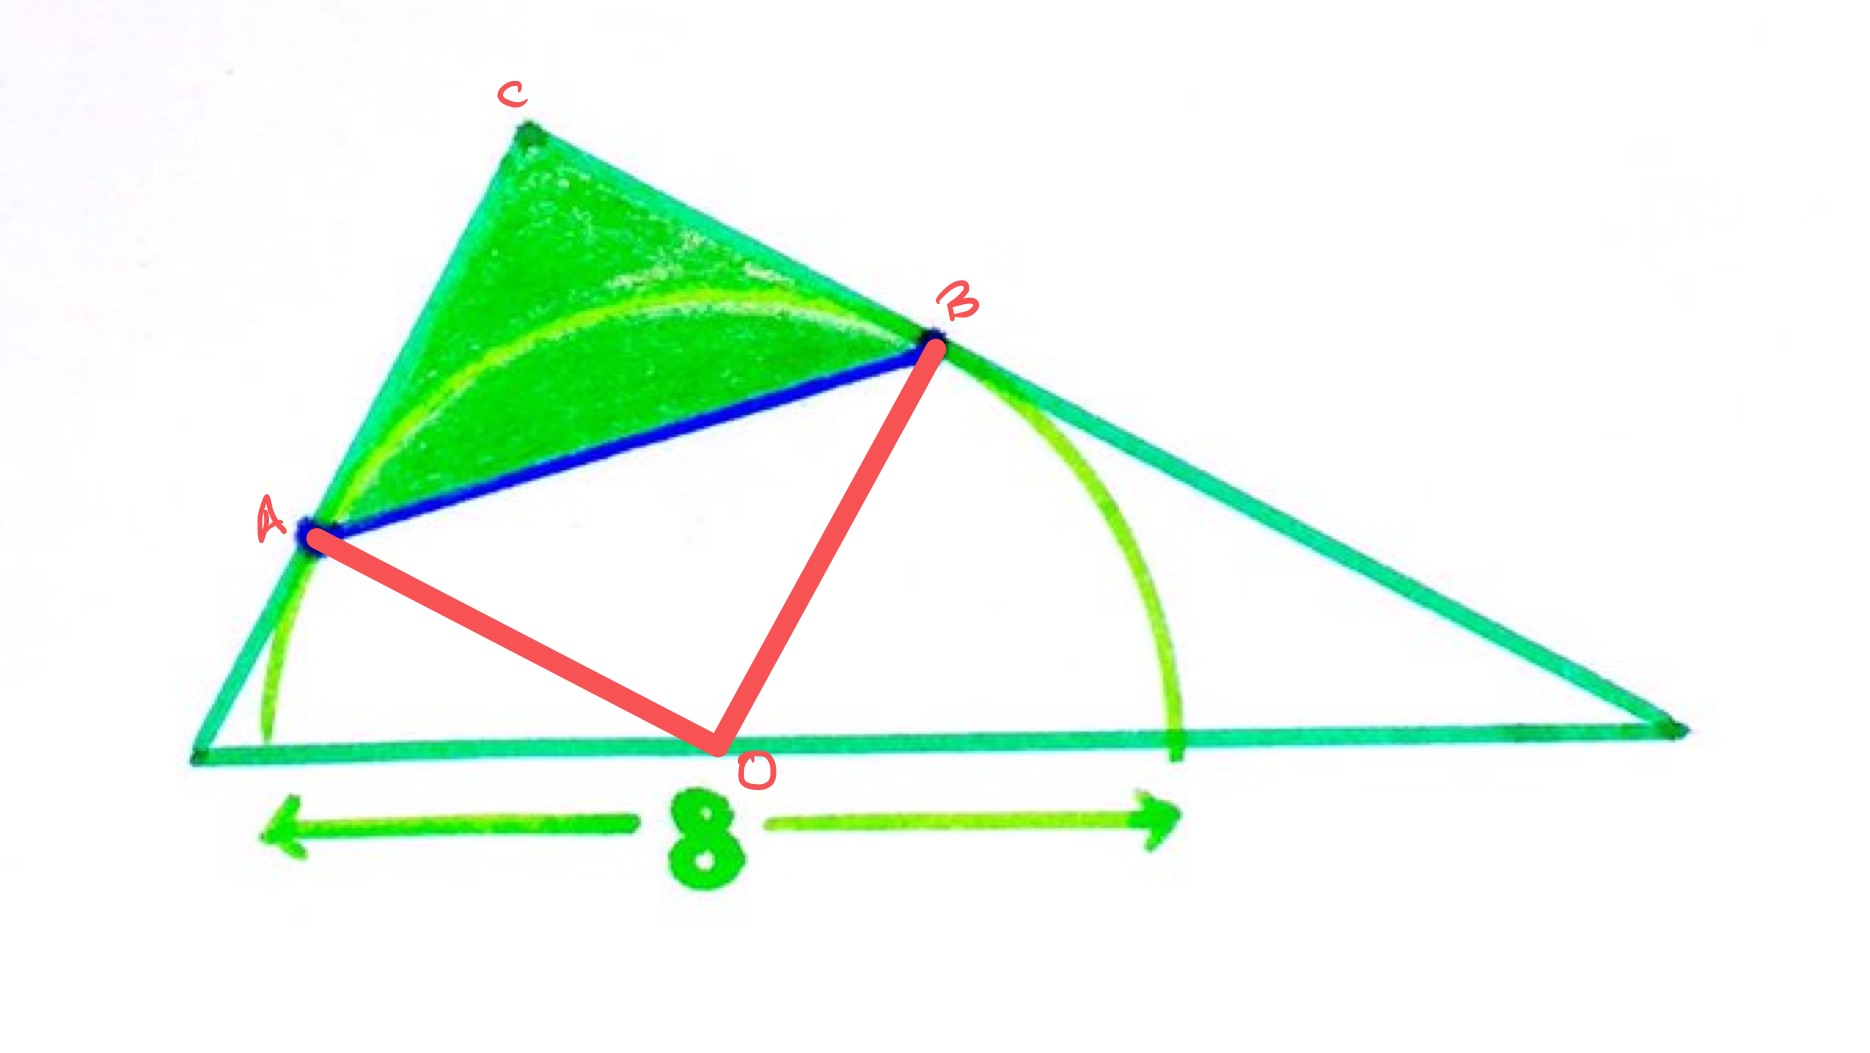 Semi-circle in a right-angled triangle labelled